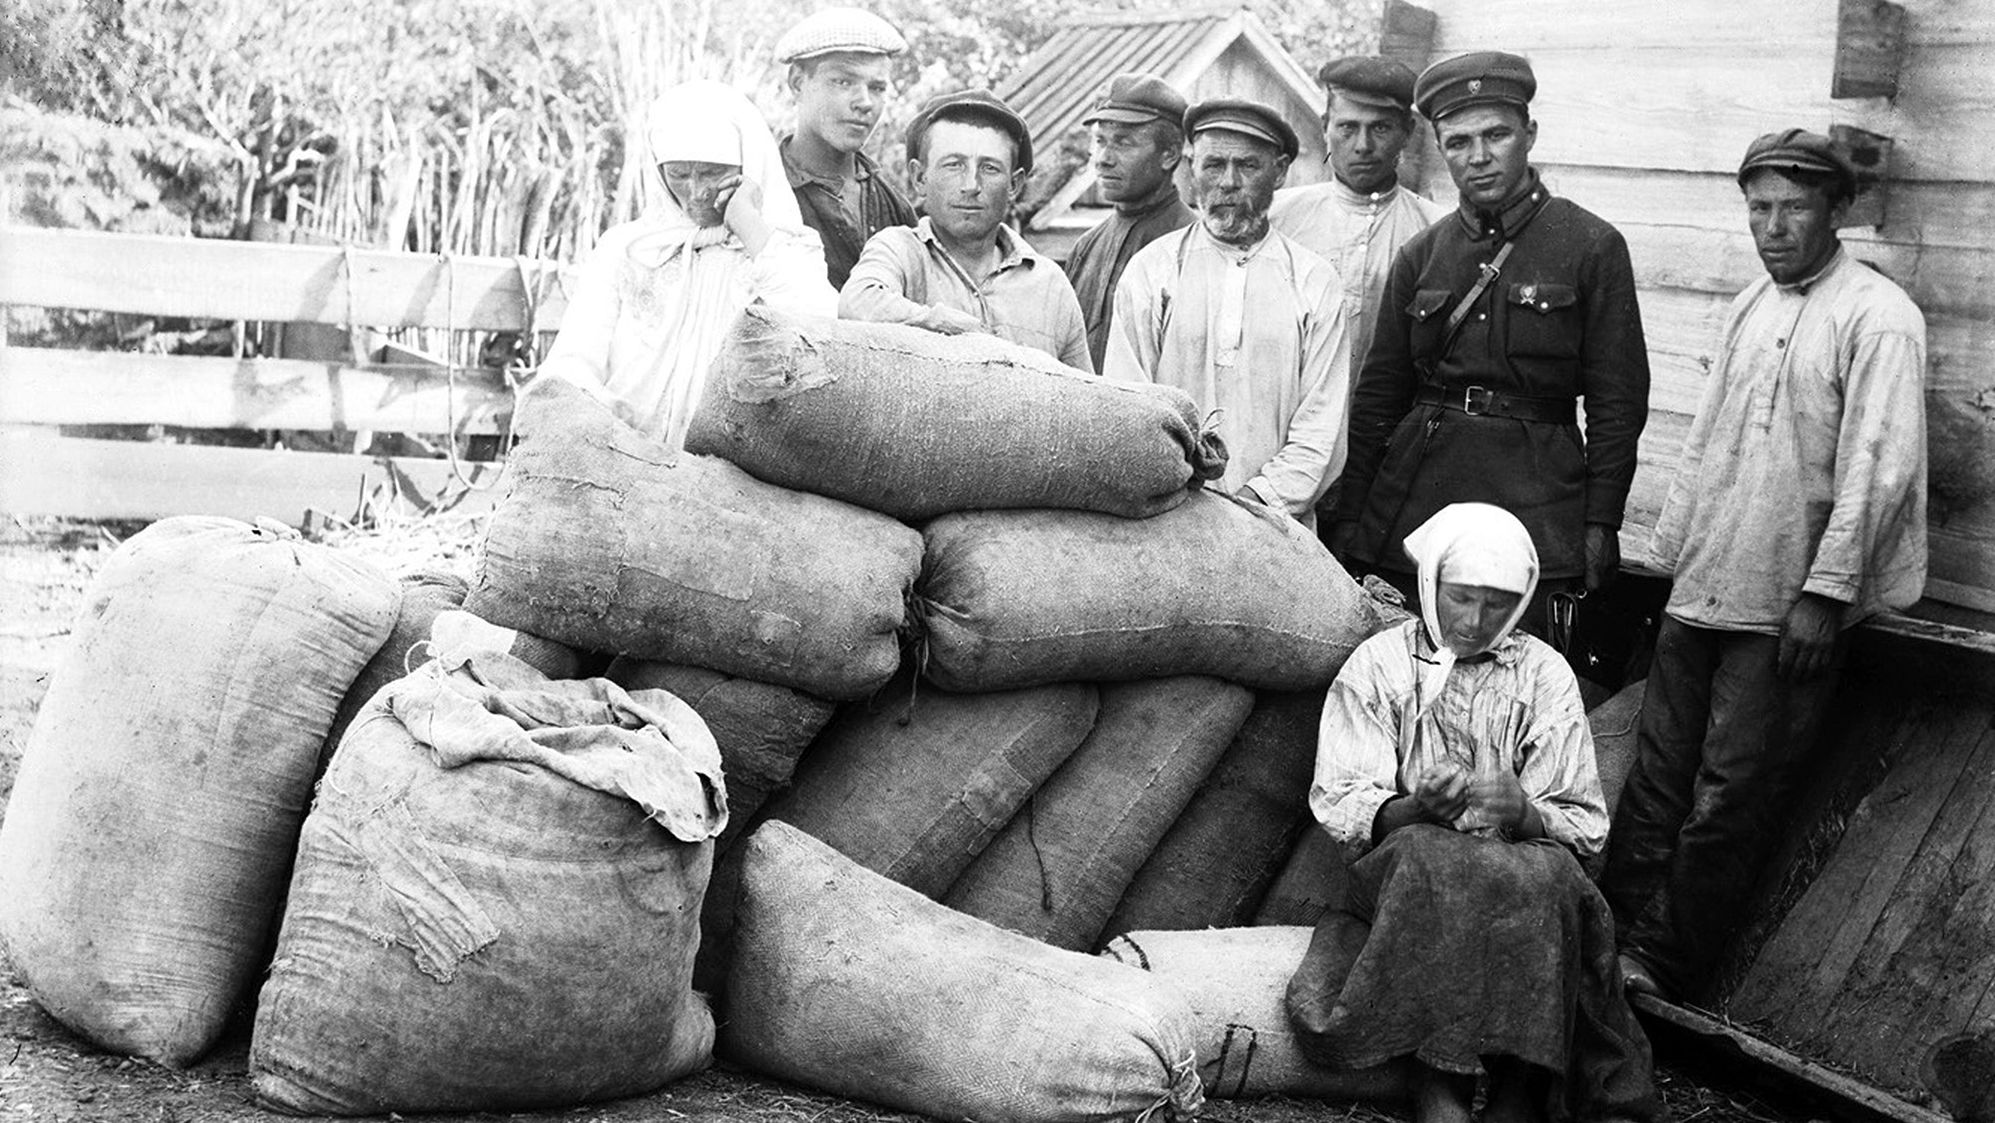 Around 4 million people died during the the man-made famine in Soviet Ukraine -- known as the "Holodomor" -- between 1932 to 1933.